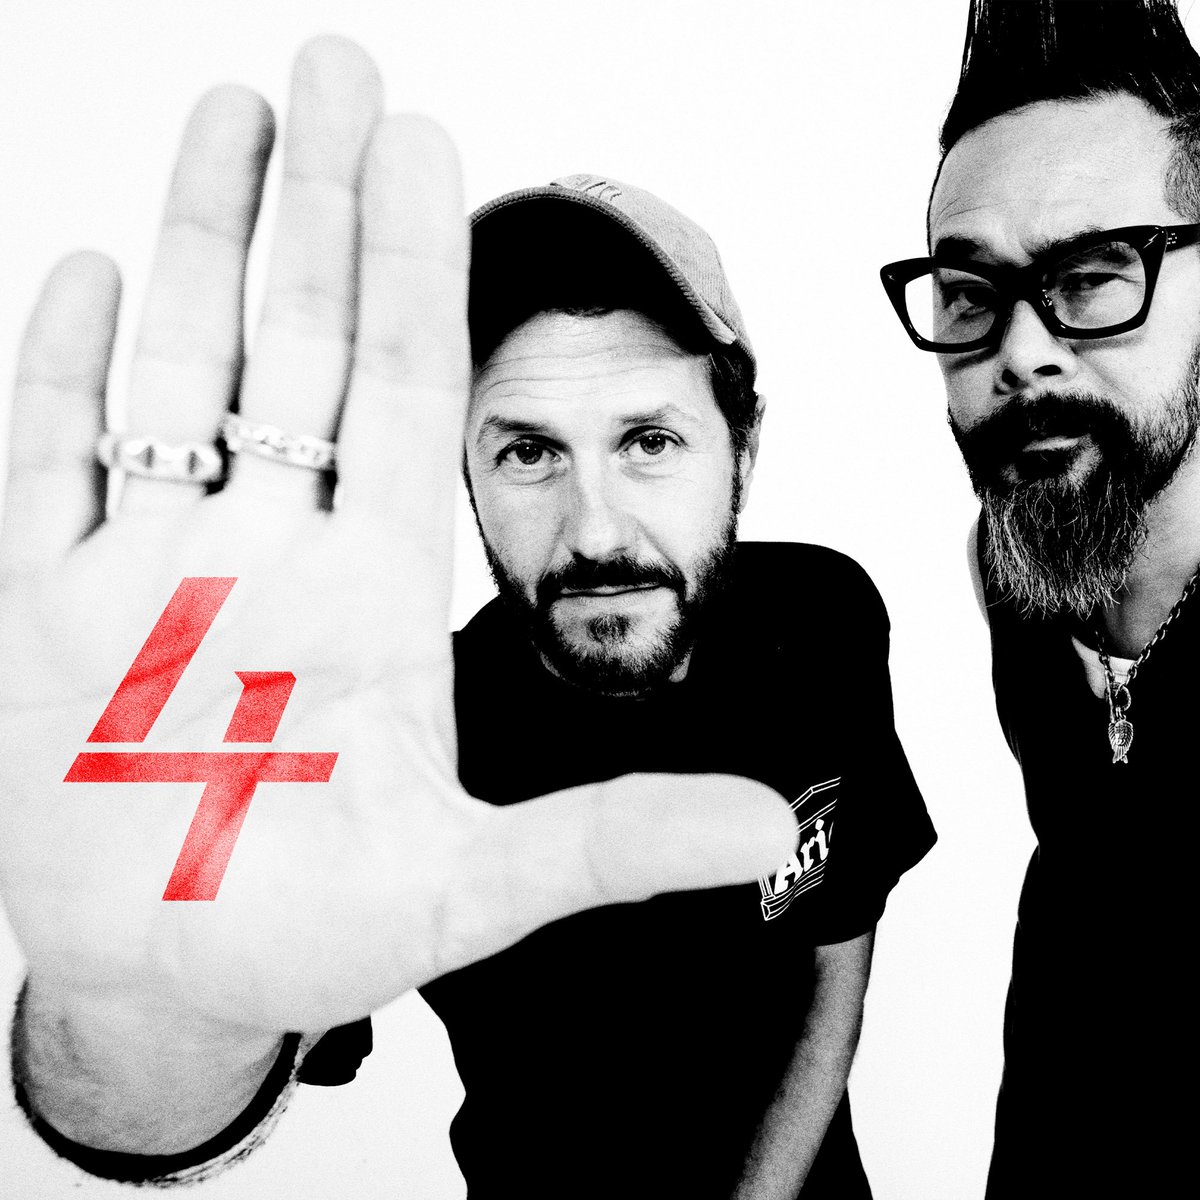 Black / Red is currently sitting at number 4 in the official album midweek chart. Thank you to everyone who has streamed and bought a copy so far x Feeder. #feeder #blackred #newalbum #stream #newmusic